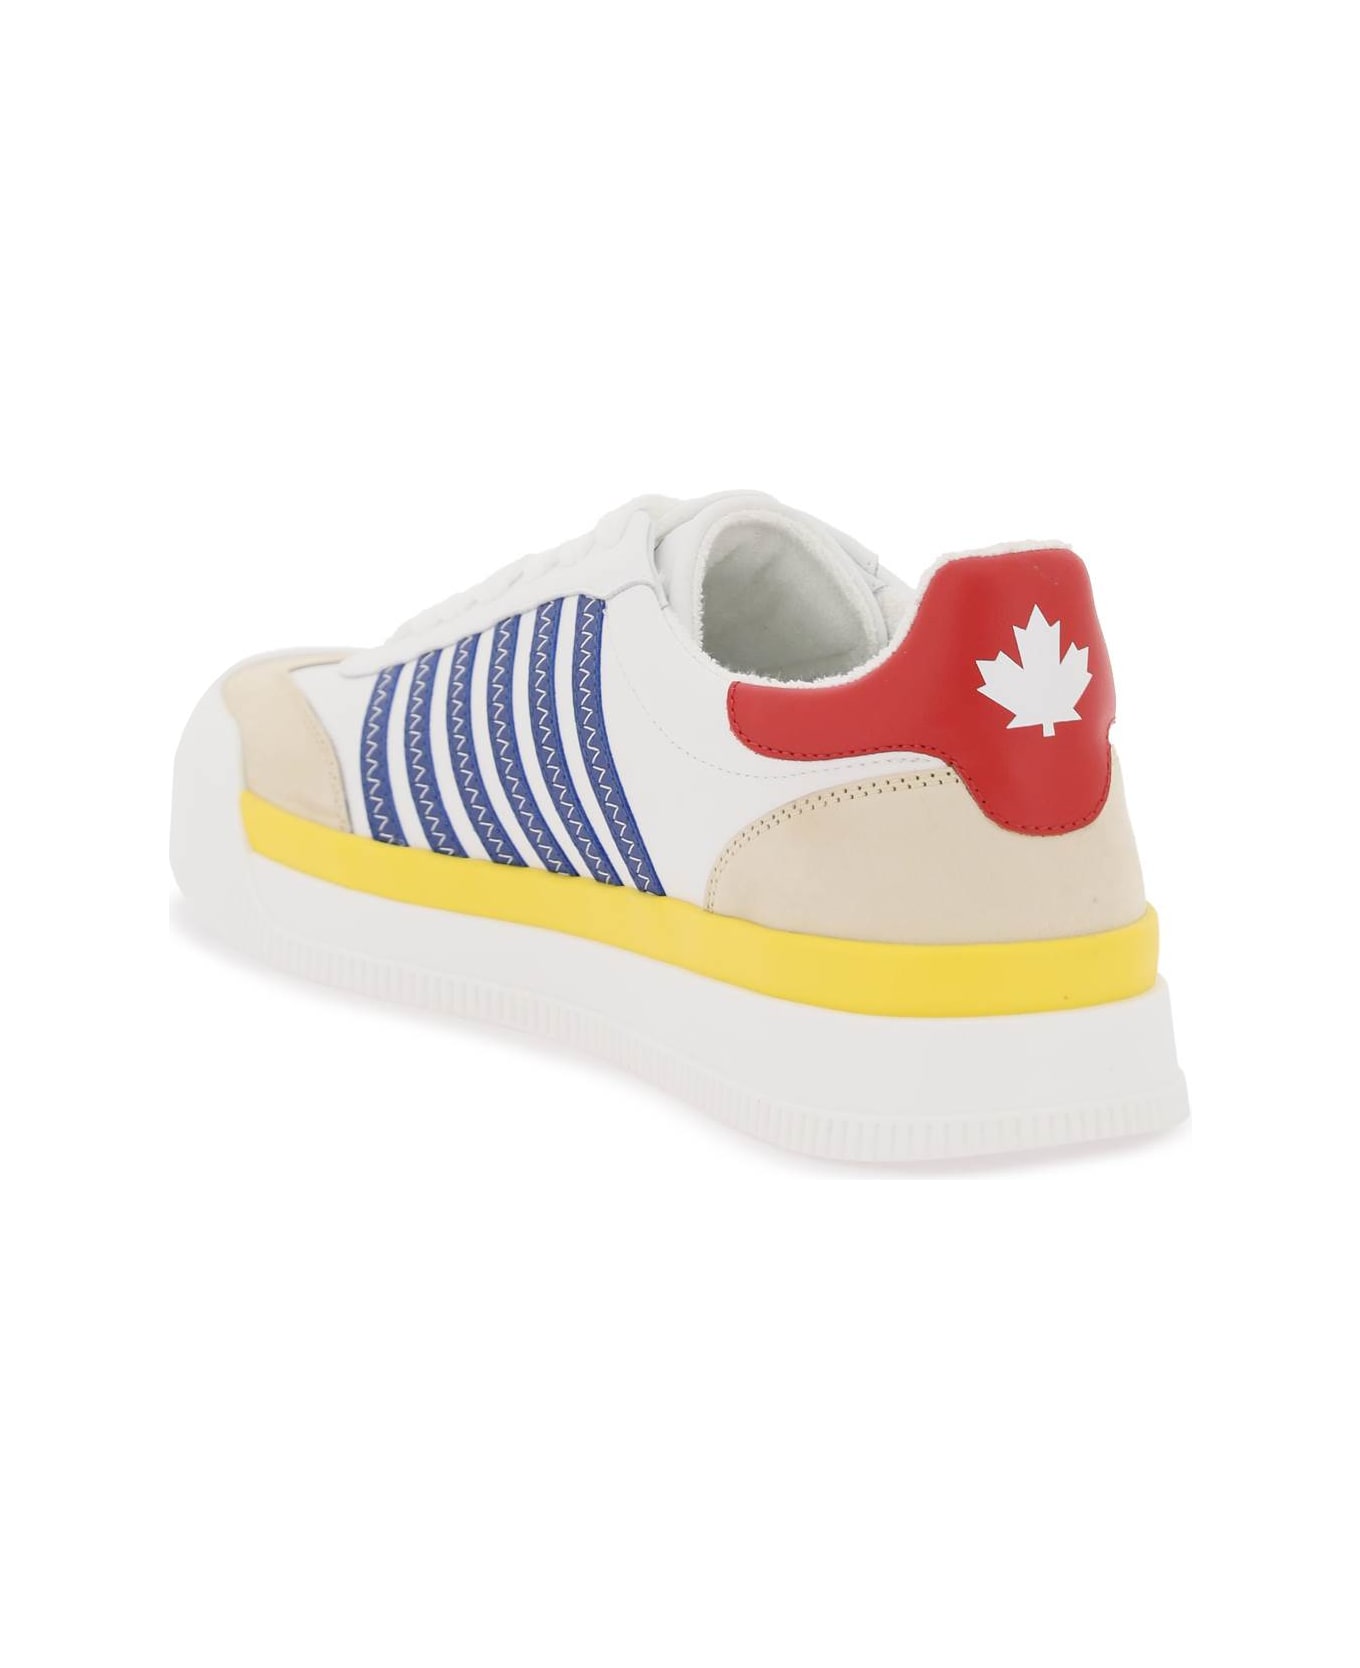 Dsquared2 New Jersey Sneakers - WHITE/YELLOW/BLUE